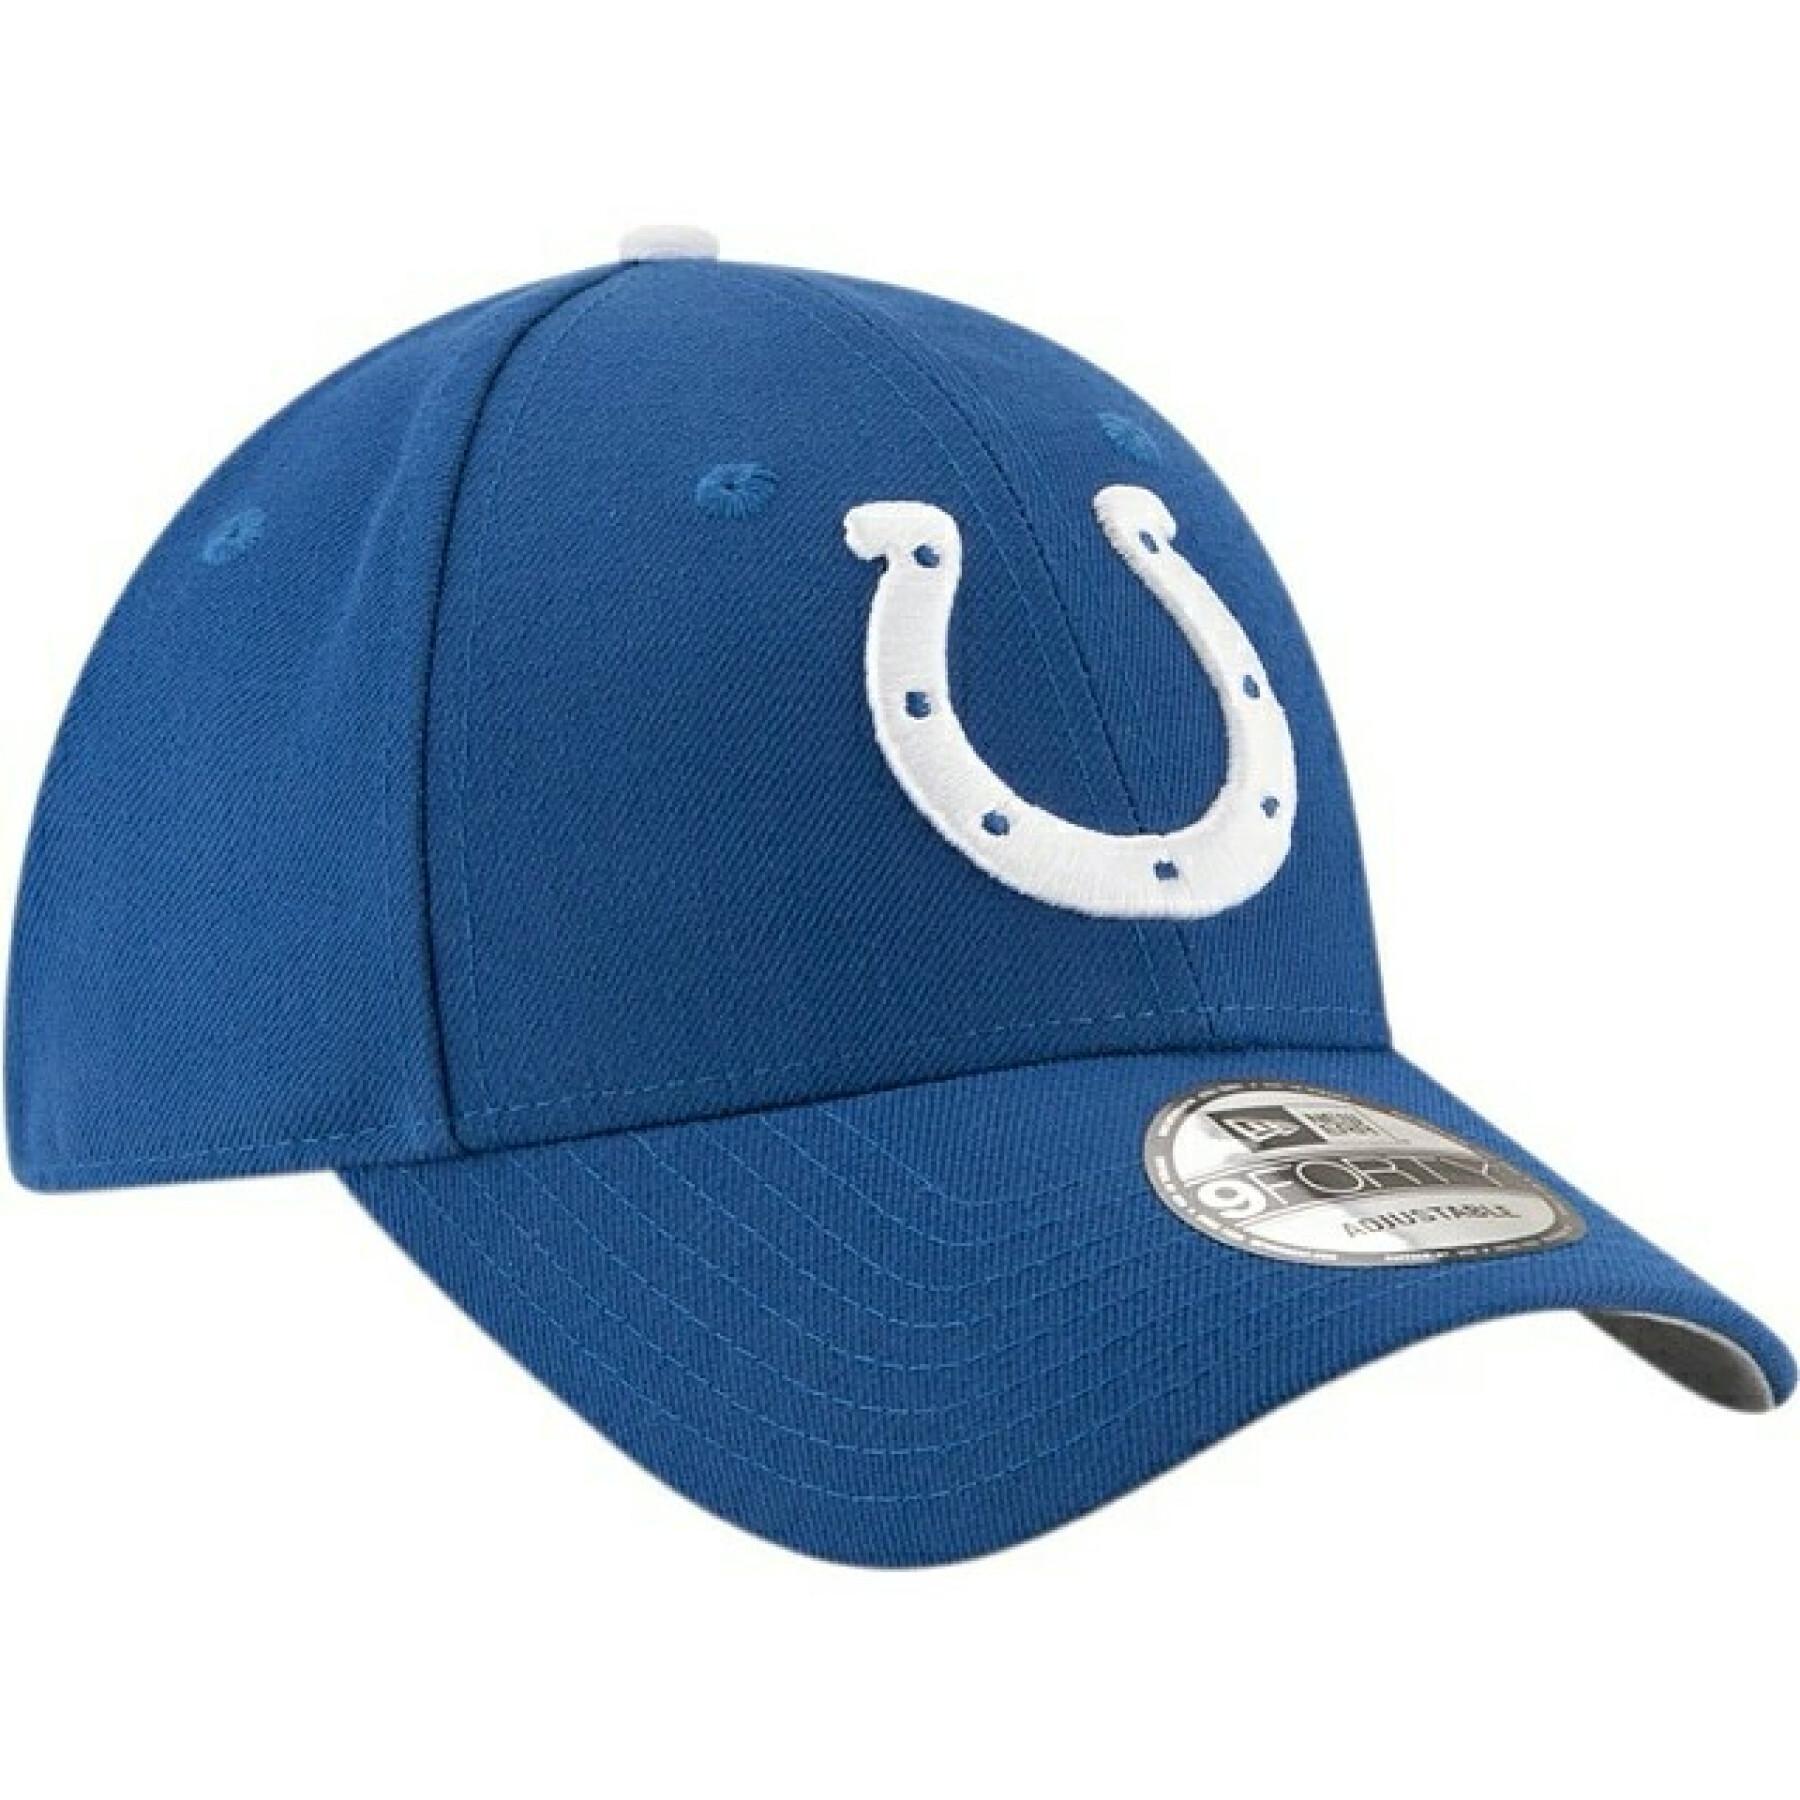 Kappe Indianapolis Colts NFL 2021/22